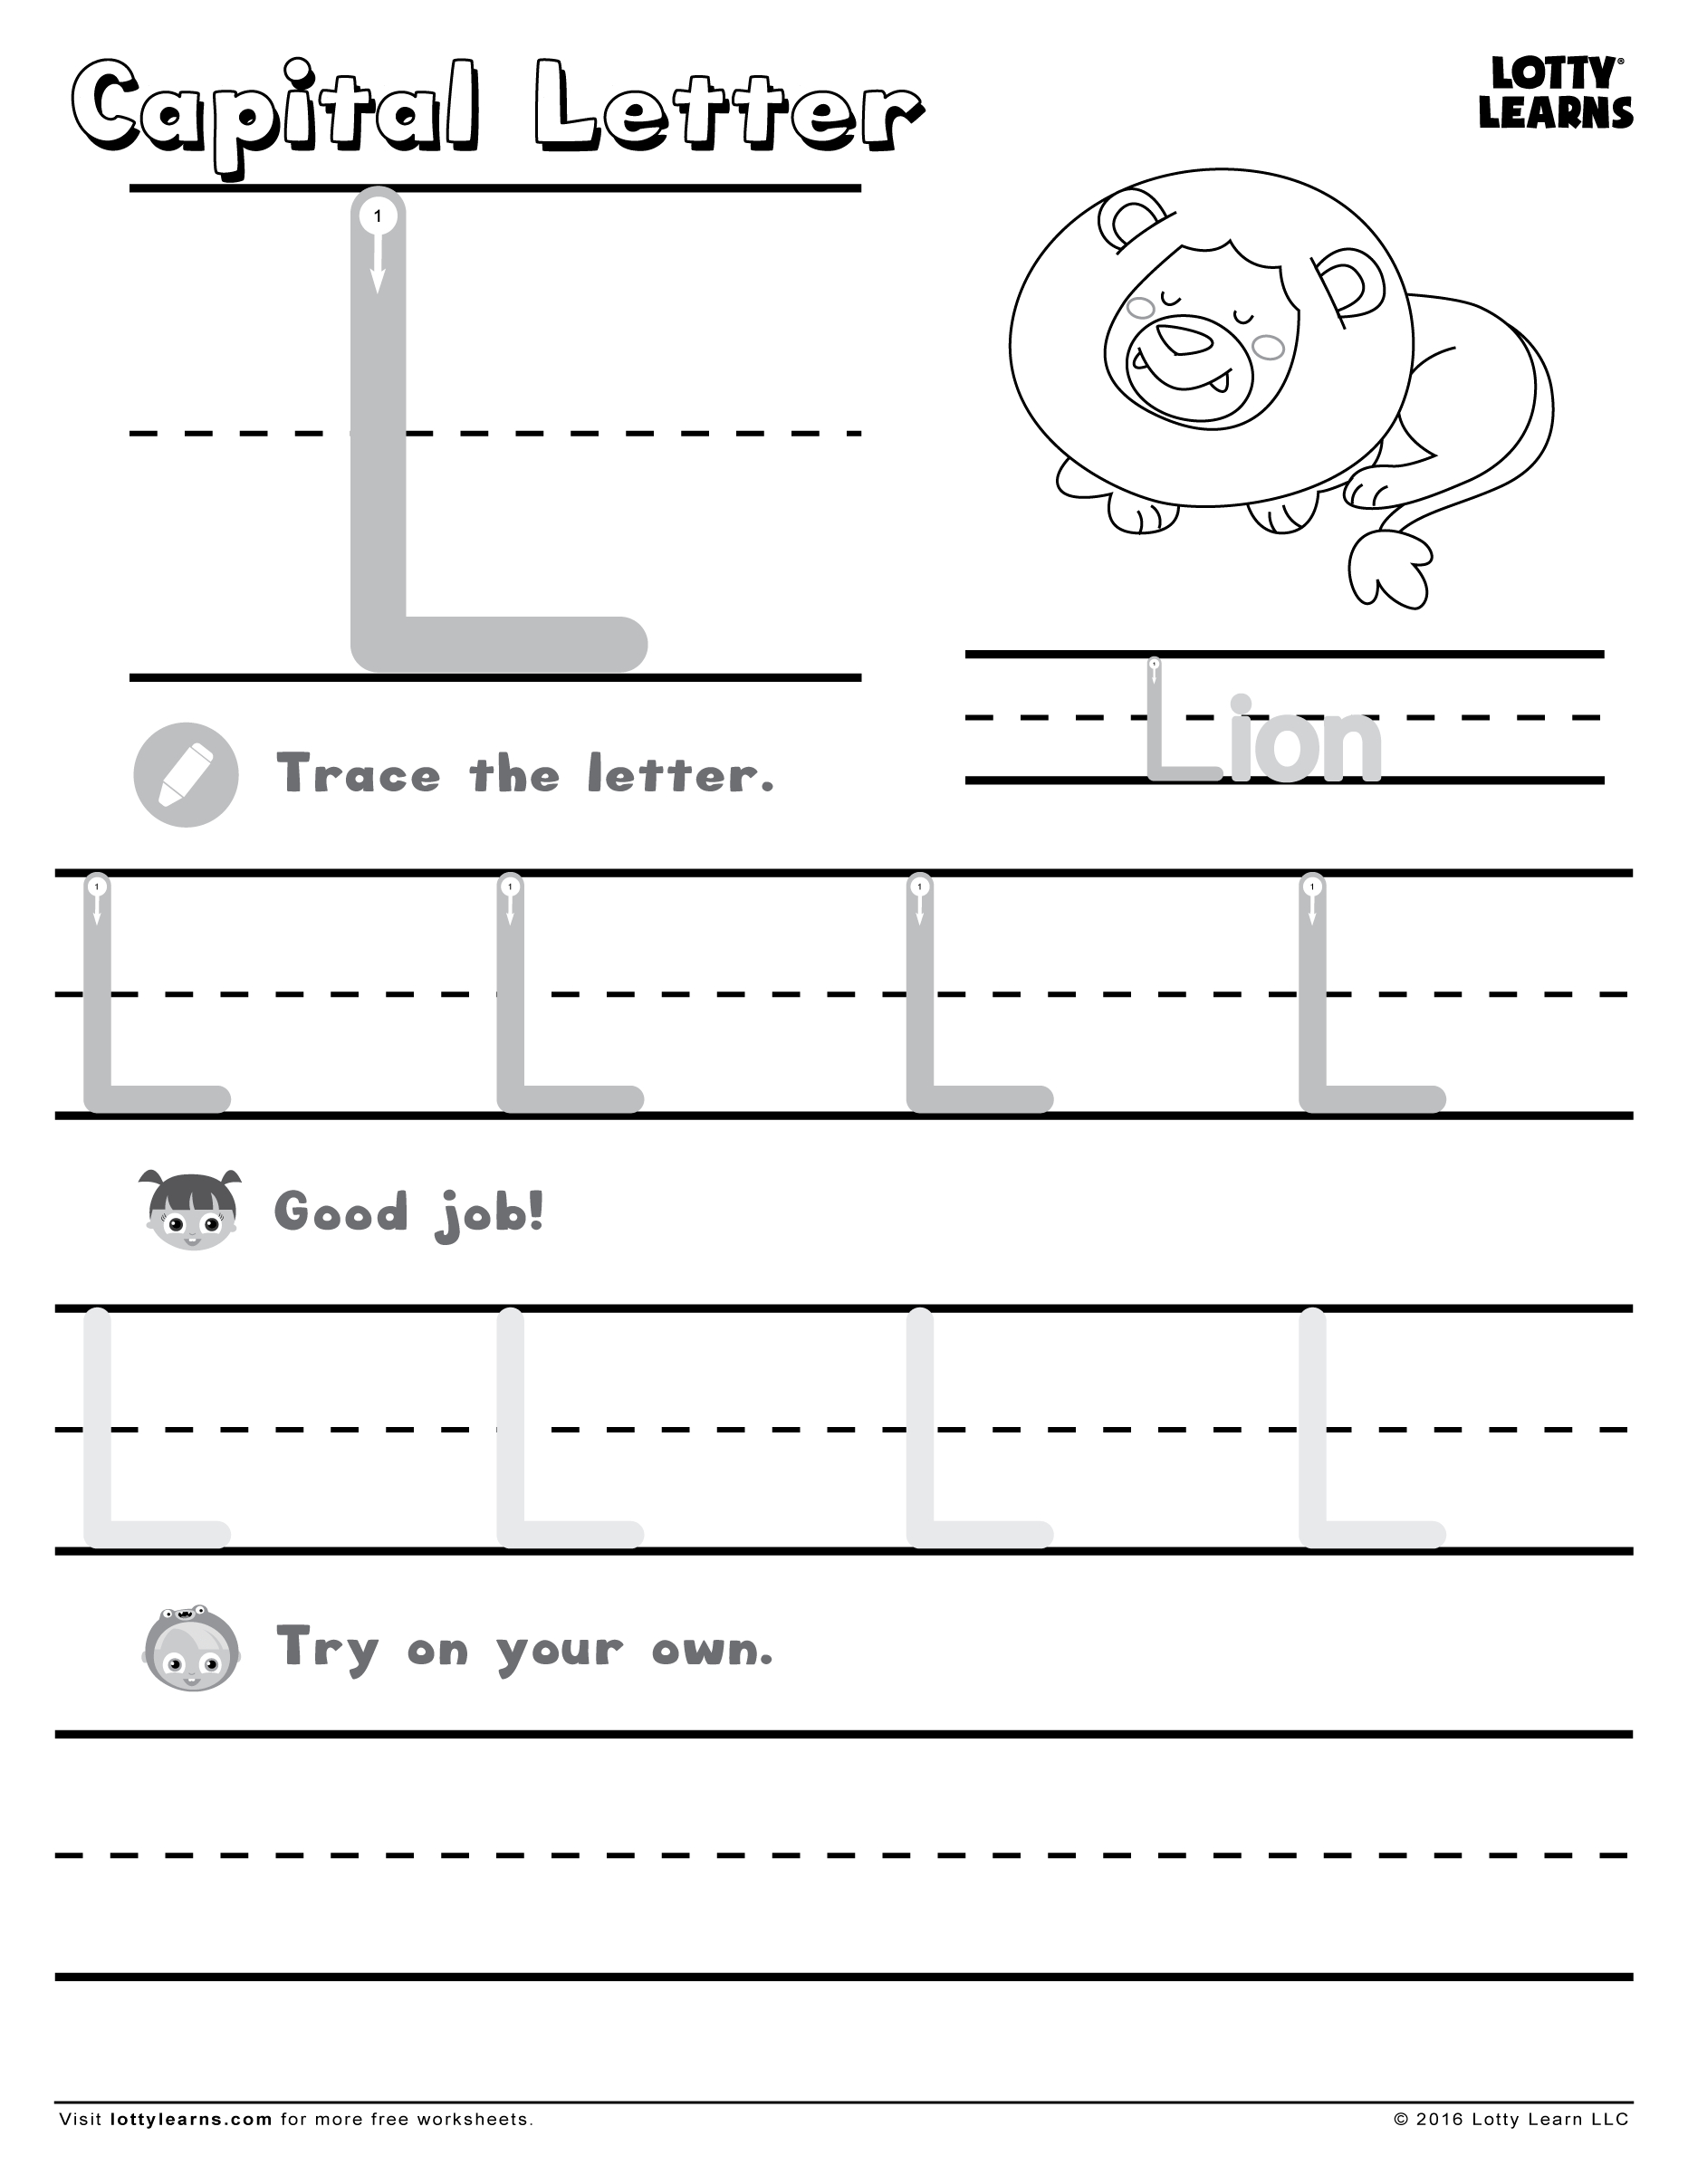 Capital Letter L | Lotty Learns | Lowercase A, Lower Case with regard to Tracing Letter L Worksheets For Kindergarten